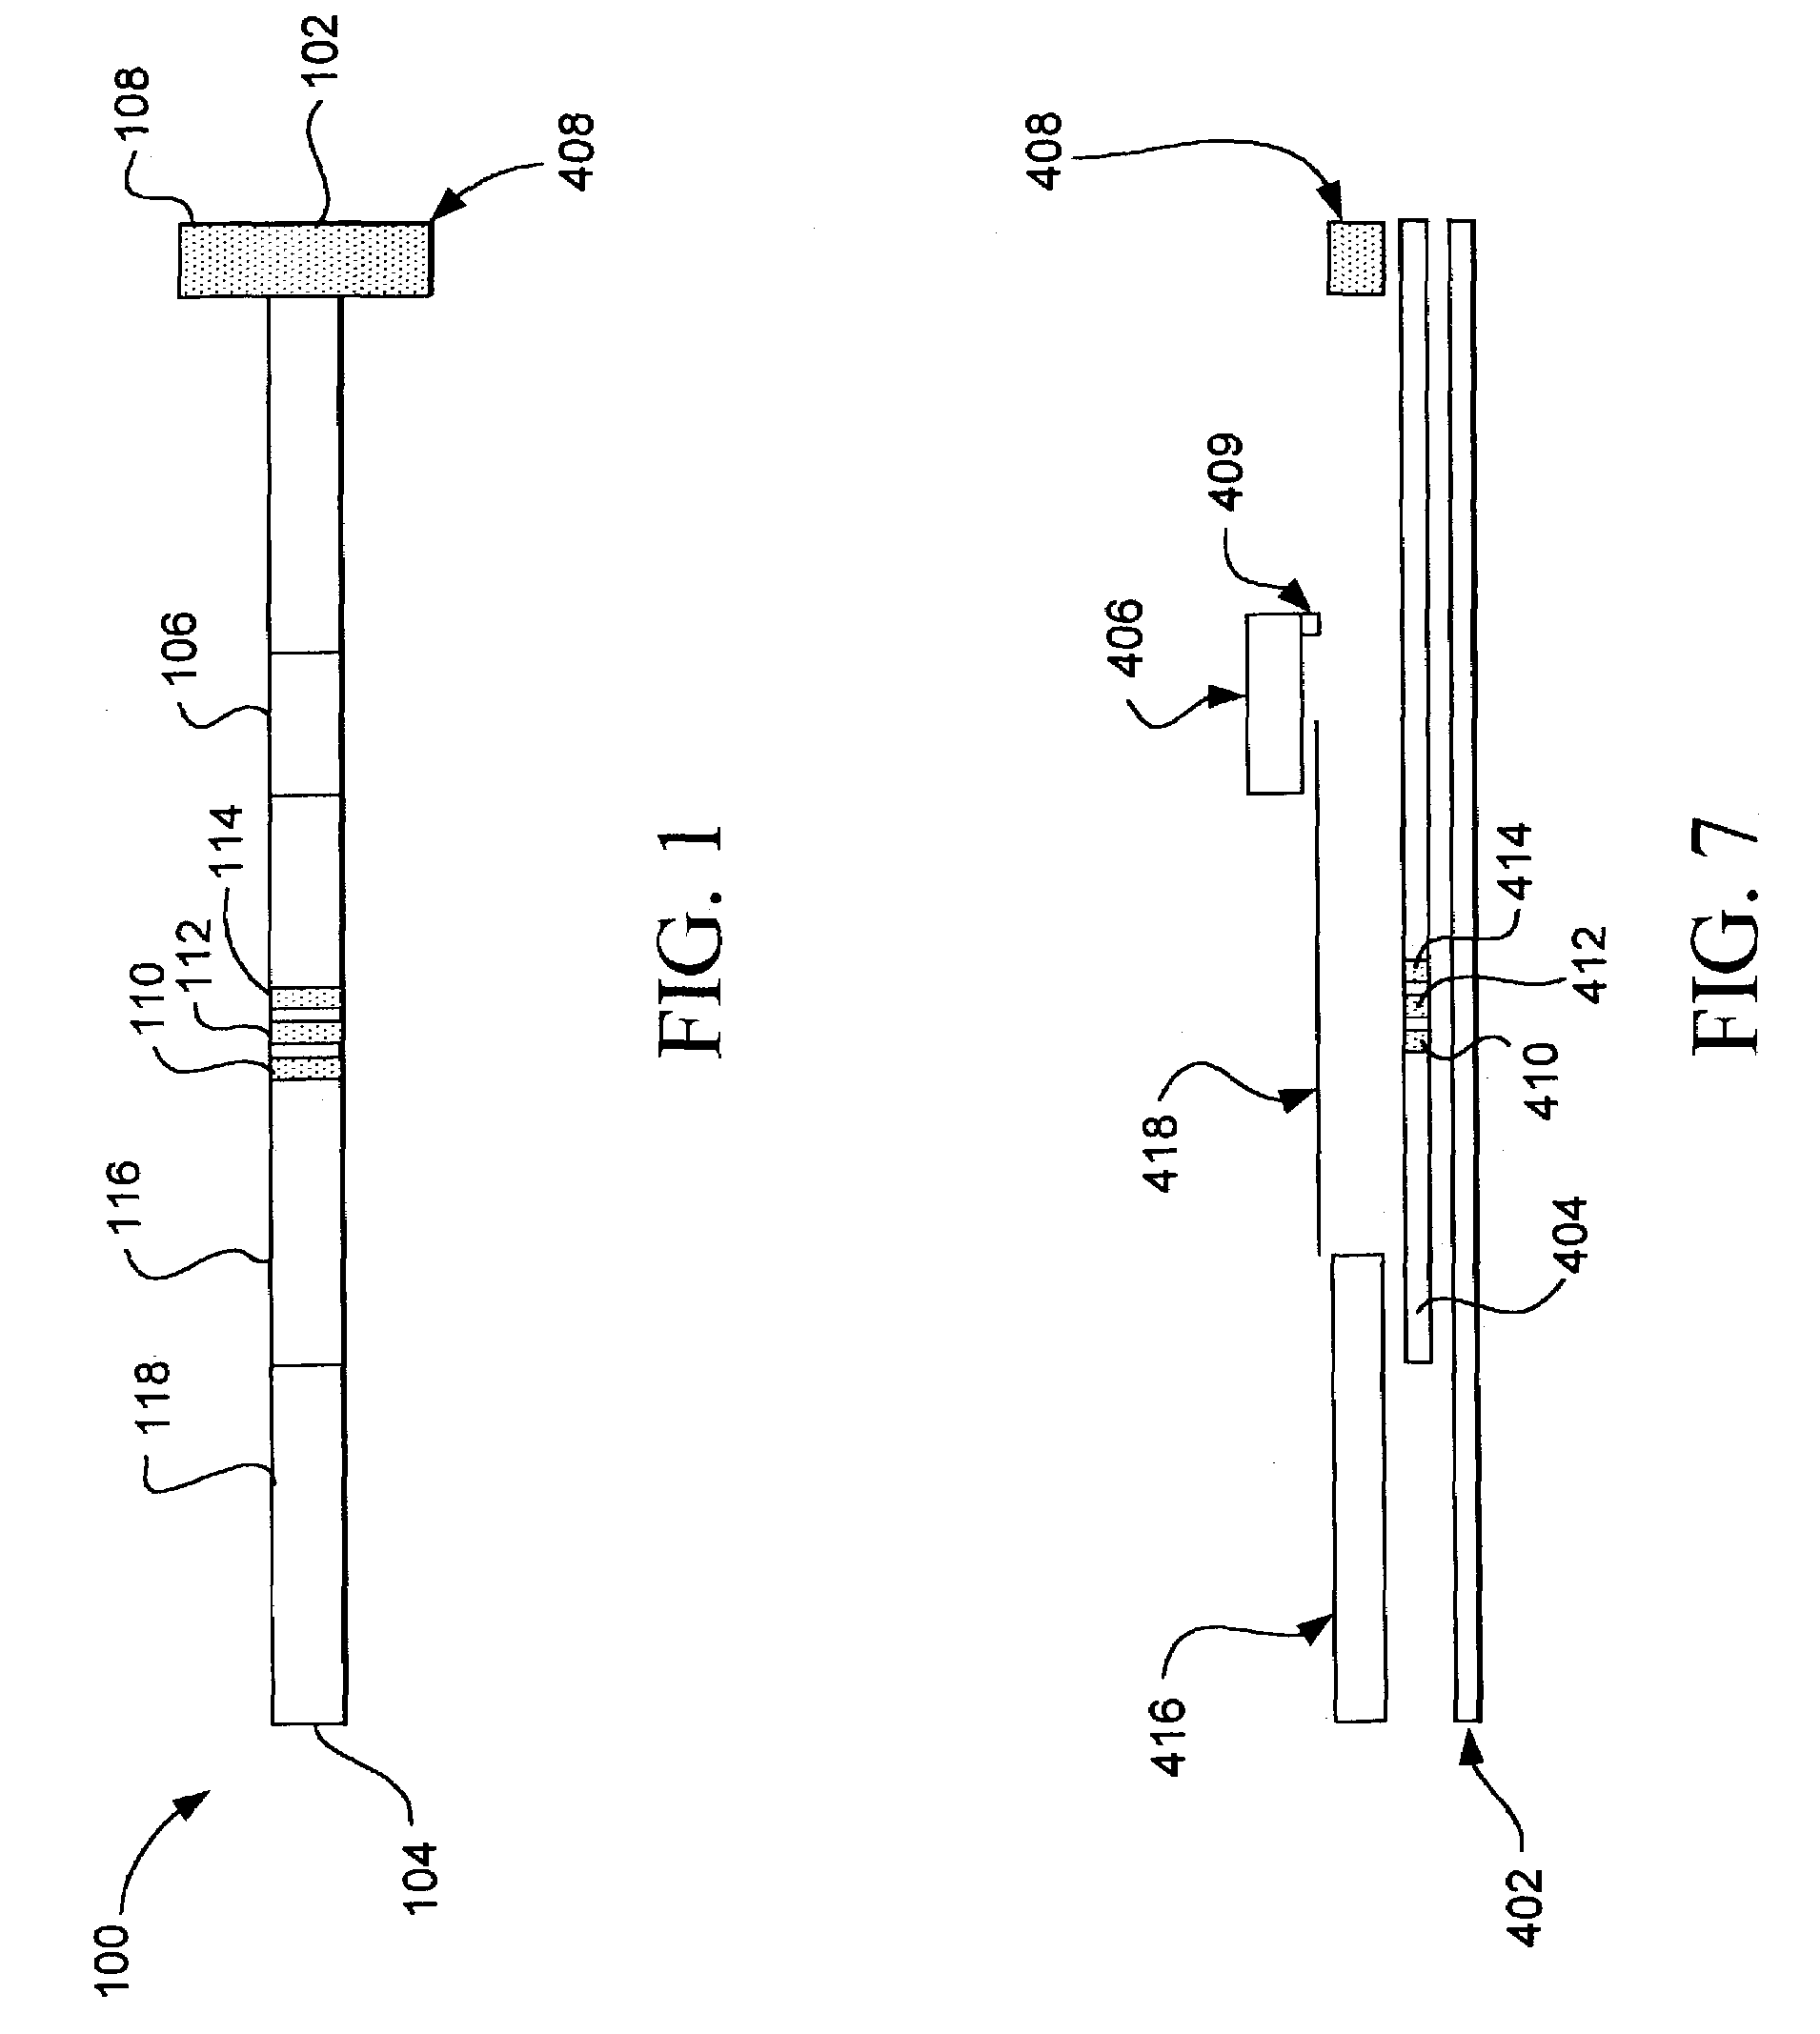 Bidirectional lateral flow test strip and method